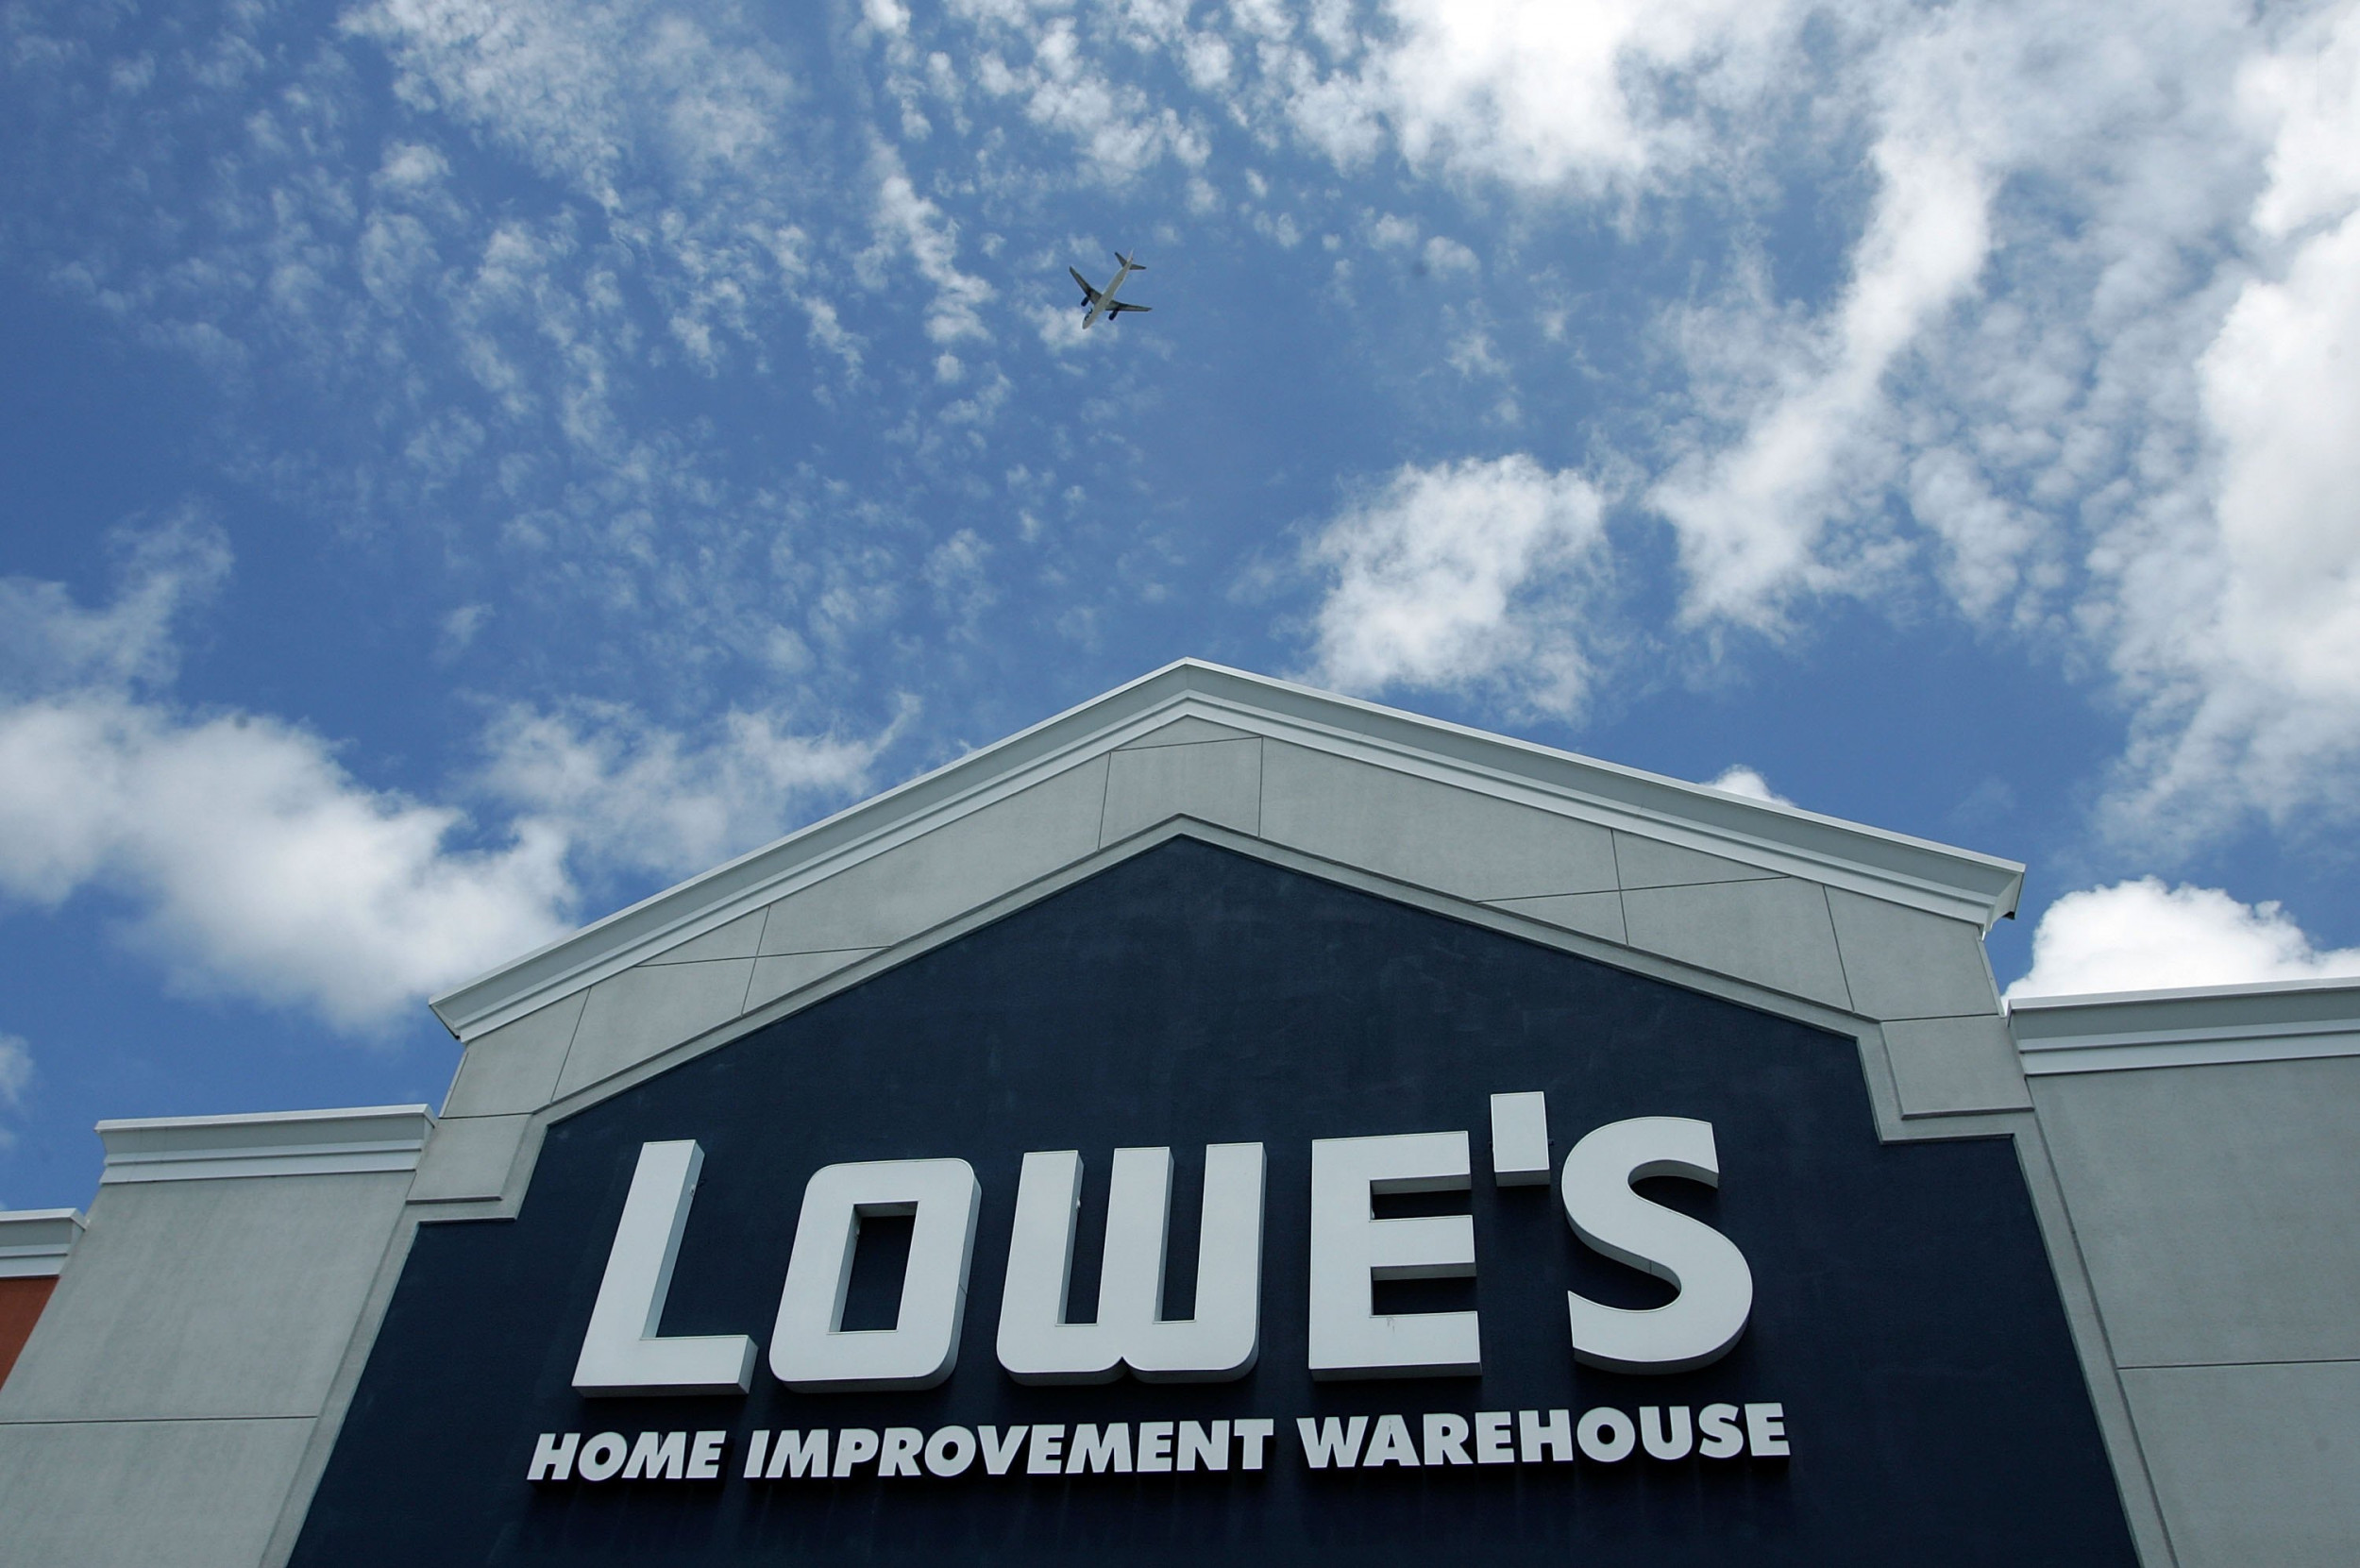 Lowe's Black Friday 2019 Deals: Sales on Tools, Kitchen Appliances